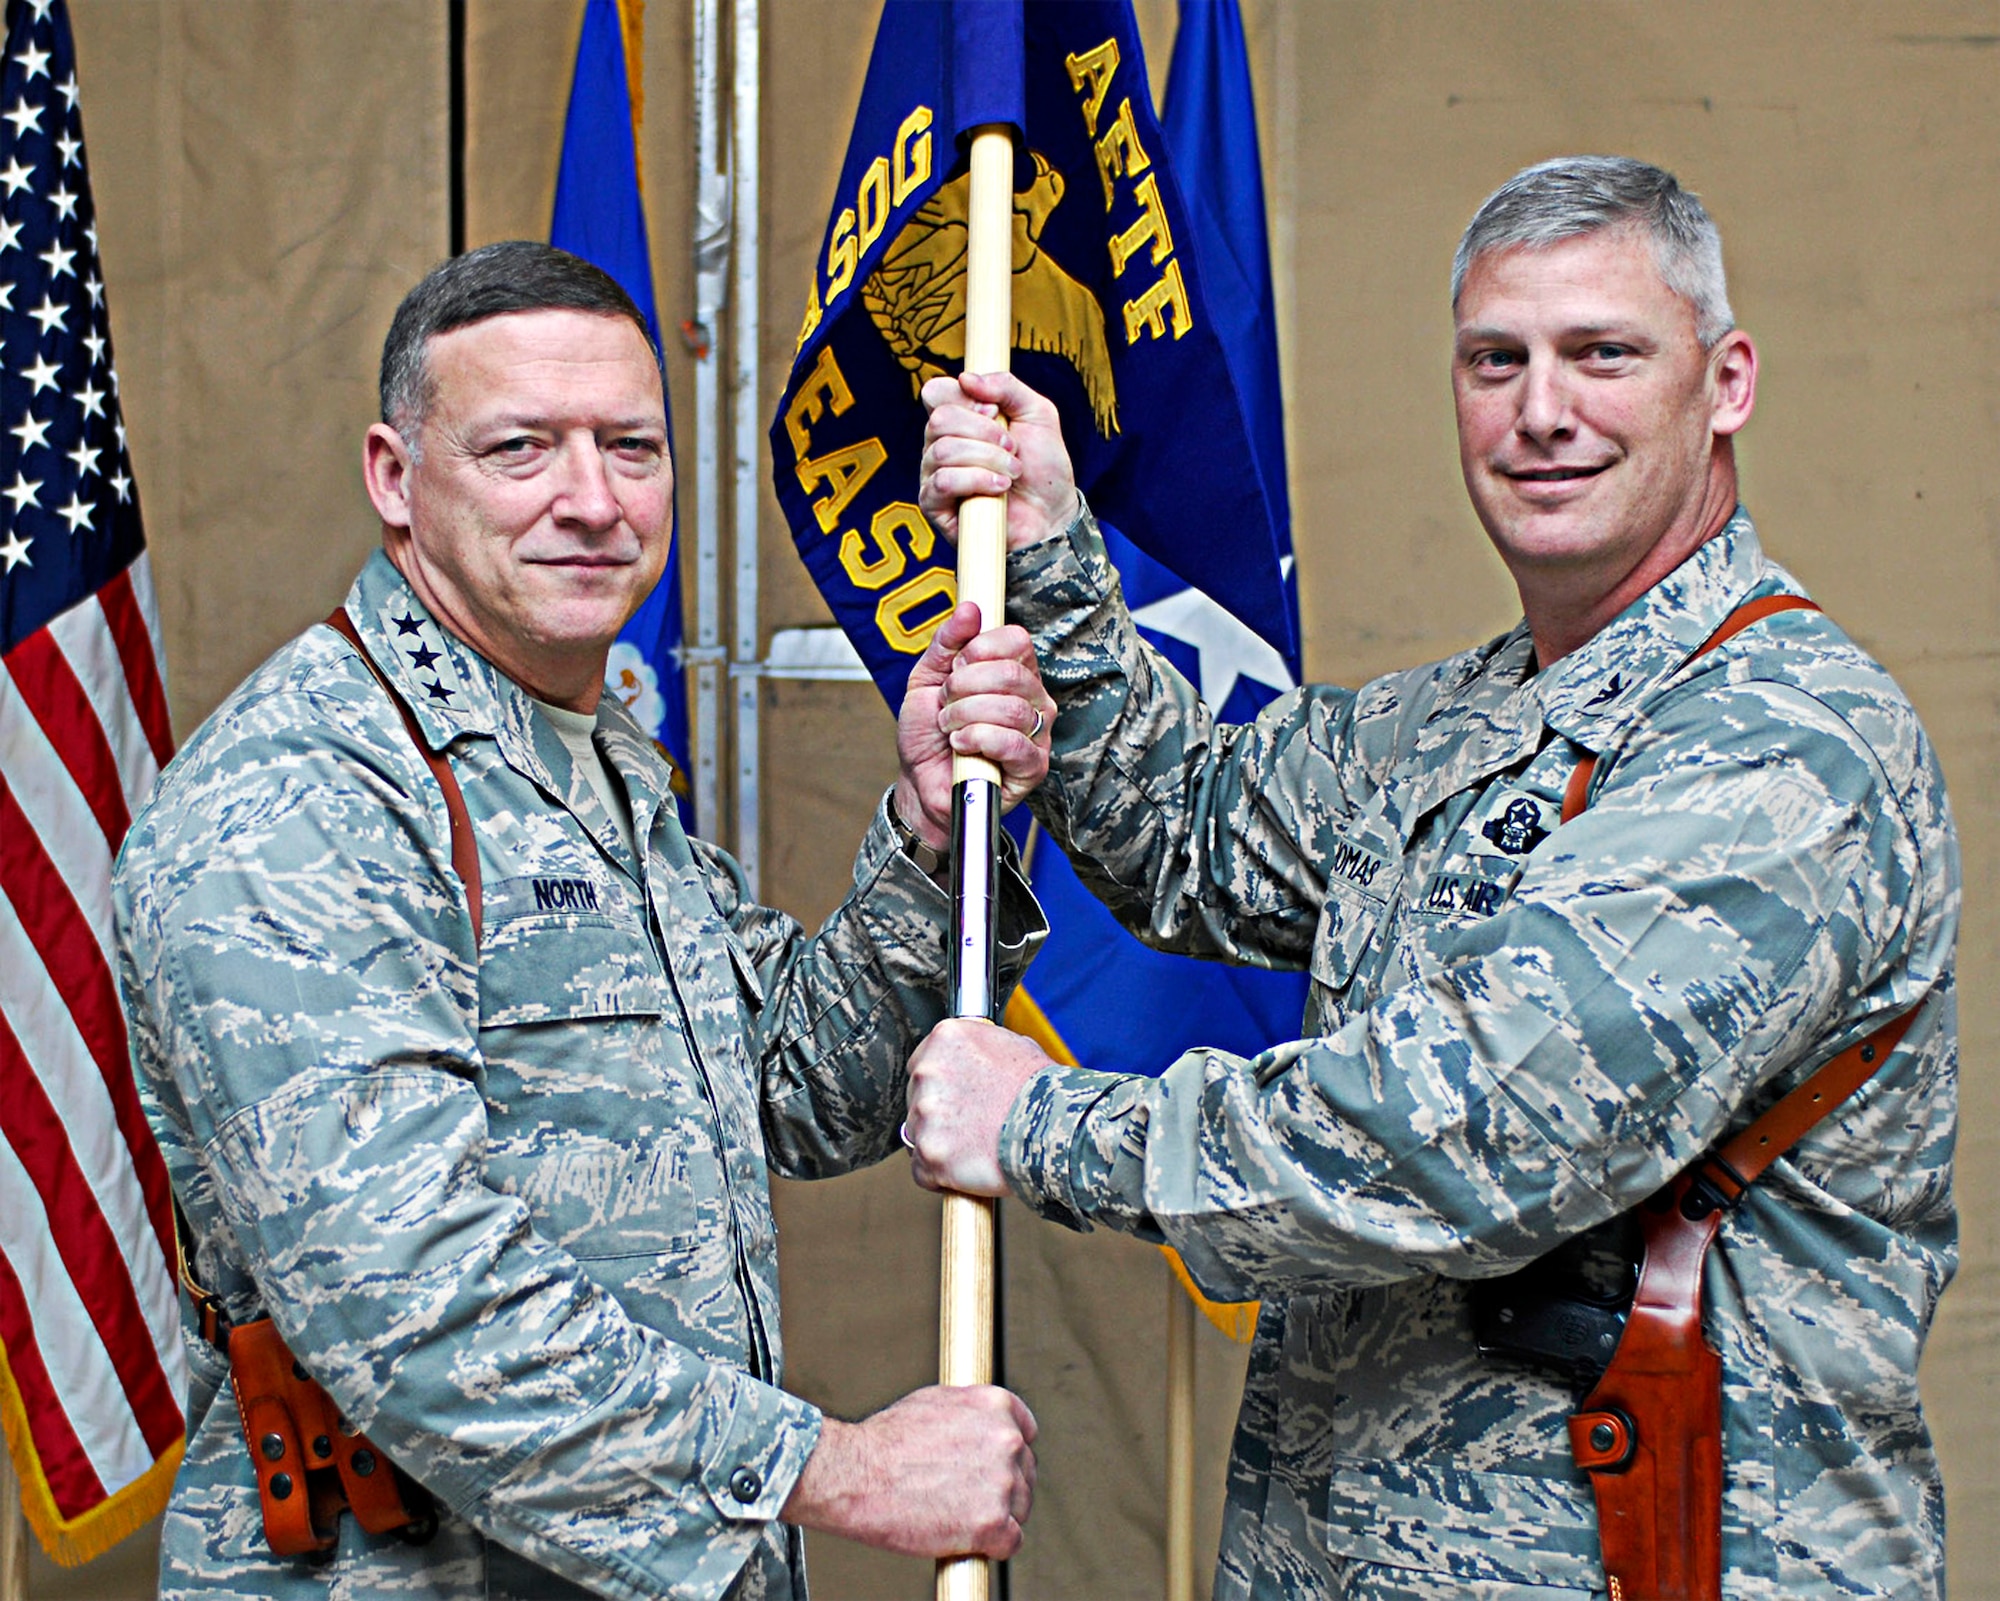 Lt. Gen. Gary North (left), commander of 9th Air Force and U.S. Air Forces Central, hands the 504th Expeditionary Air Support Operations Group guidon to Col. James Thomas March 30 who assumes command of the newly activated unit at Bagram Air Field, Afghanistan. The colonel is the first commander of the group comprising more than 125 air liaison officers and tactical air control party and combat weather Airmen deployed throughout Afghanistan.  (U.S. Air Force photo/Senior Airman Erik Cardenas)